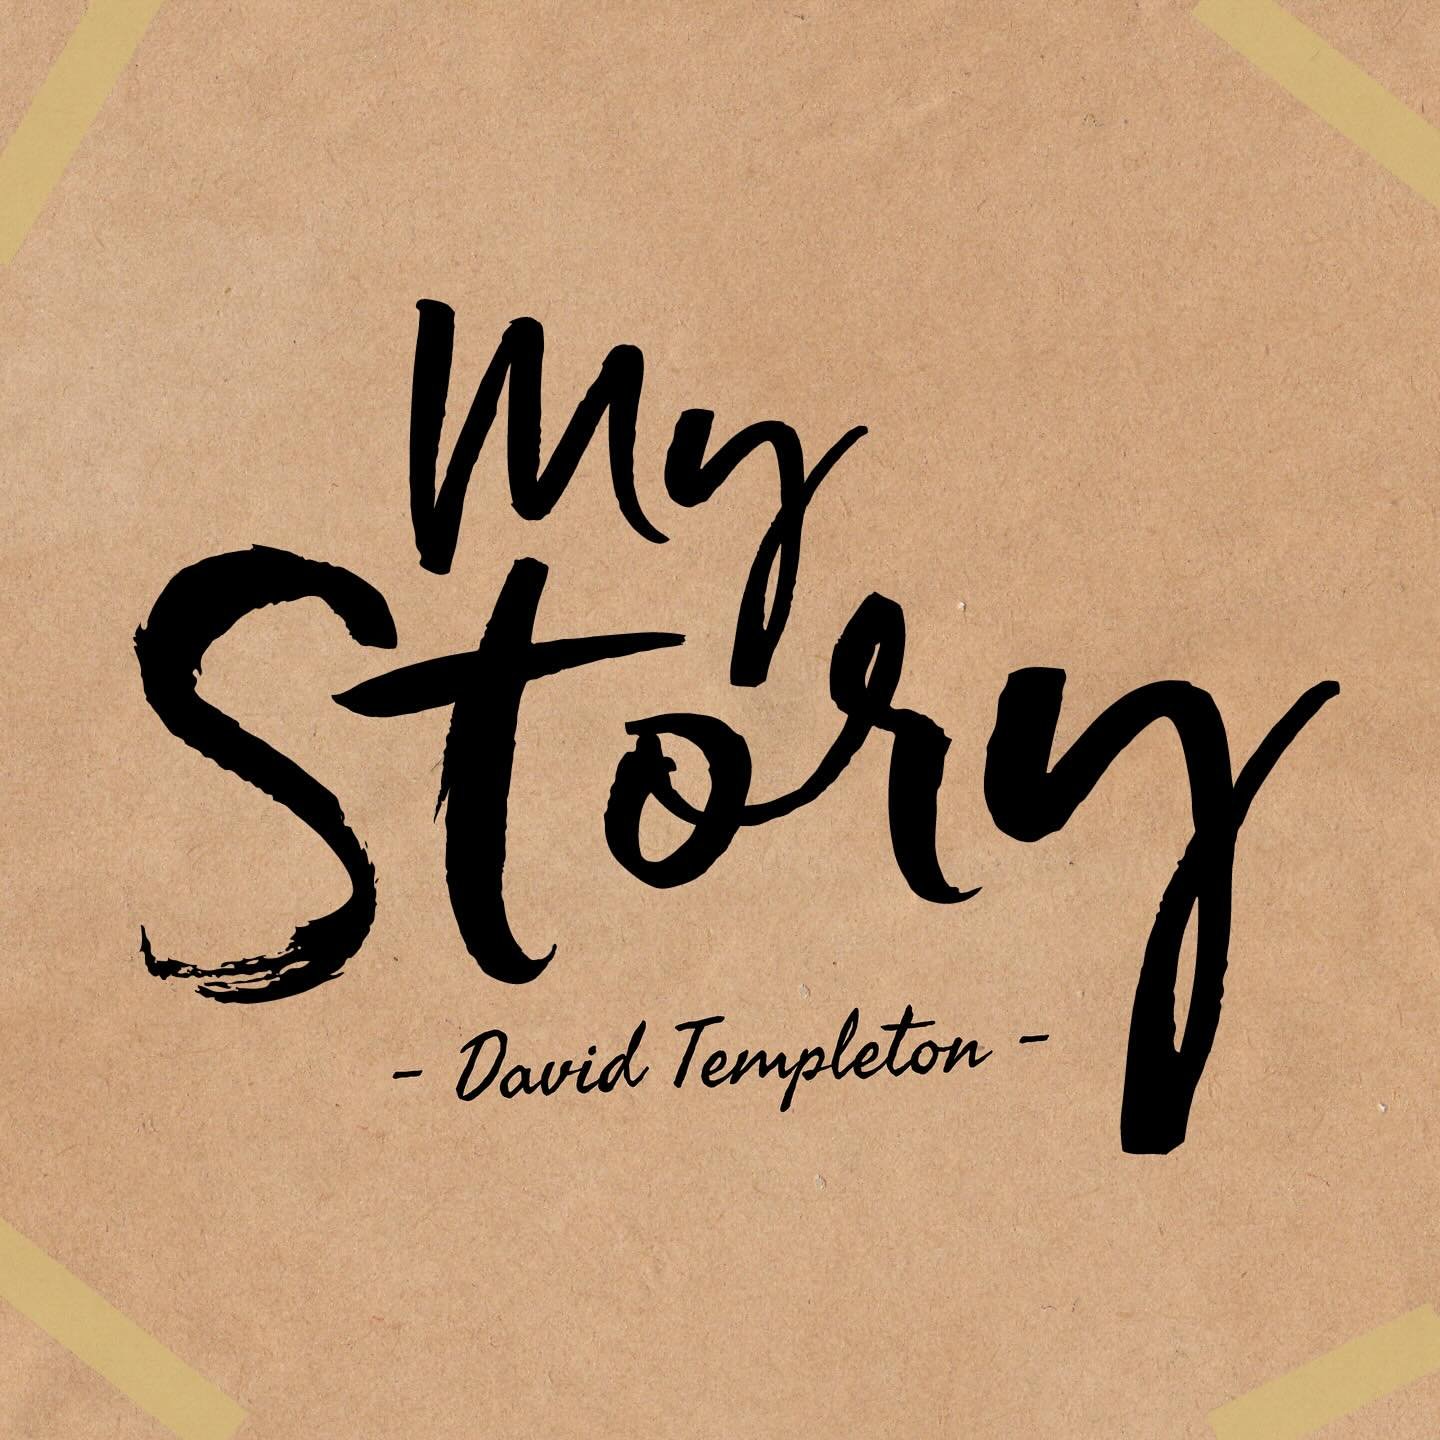 🎤 My Story 🎤

This Sunday night we have David Templeton from Safe Families coming to share his story and the story of Safe Families. We&rsquo;d love to see you there! 

6:30pm at Beersbridge Elim ⛪️ 

&ldquo;Safe Families is a charity that works wi